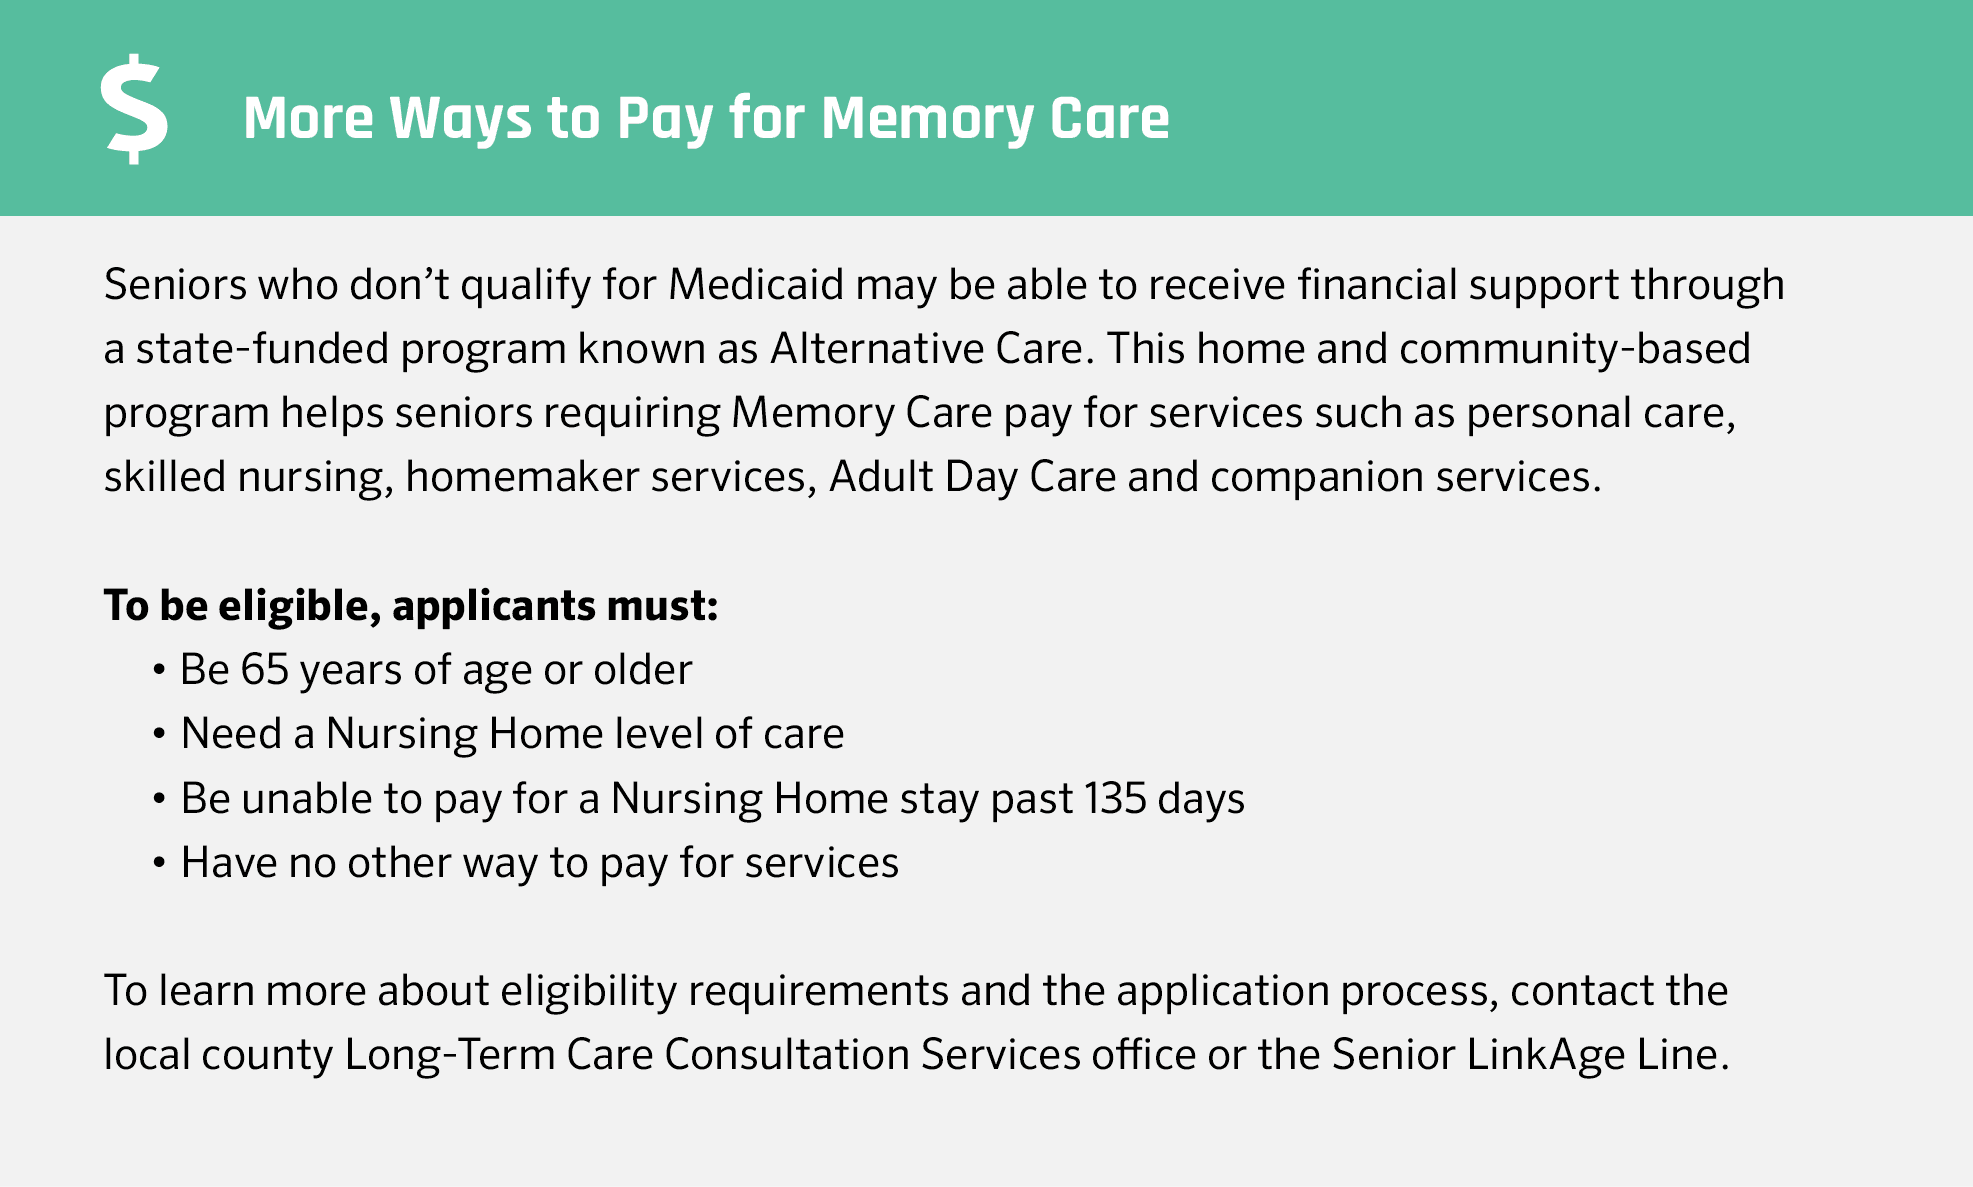 More ways to pay for memory care in Minnesota